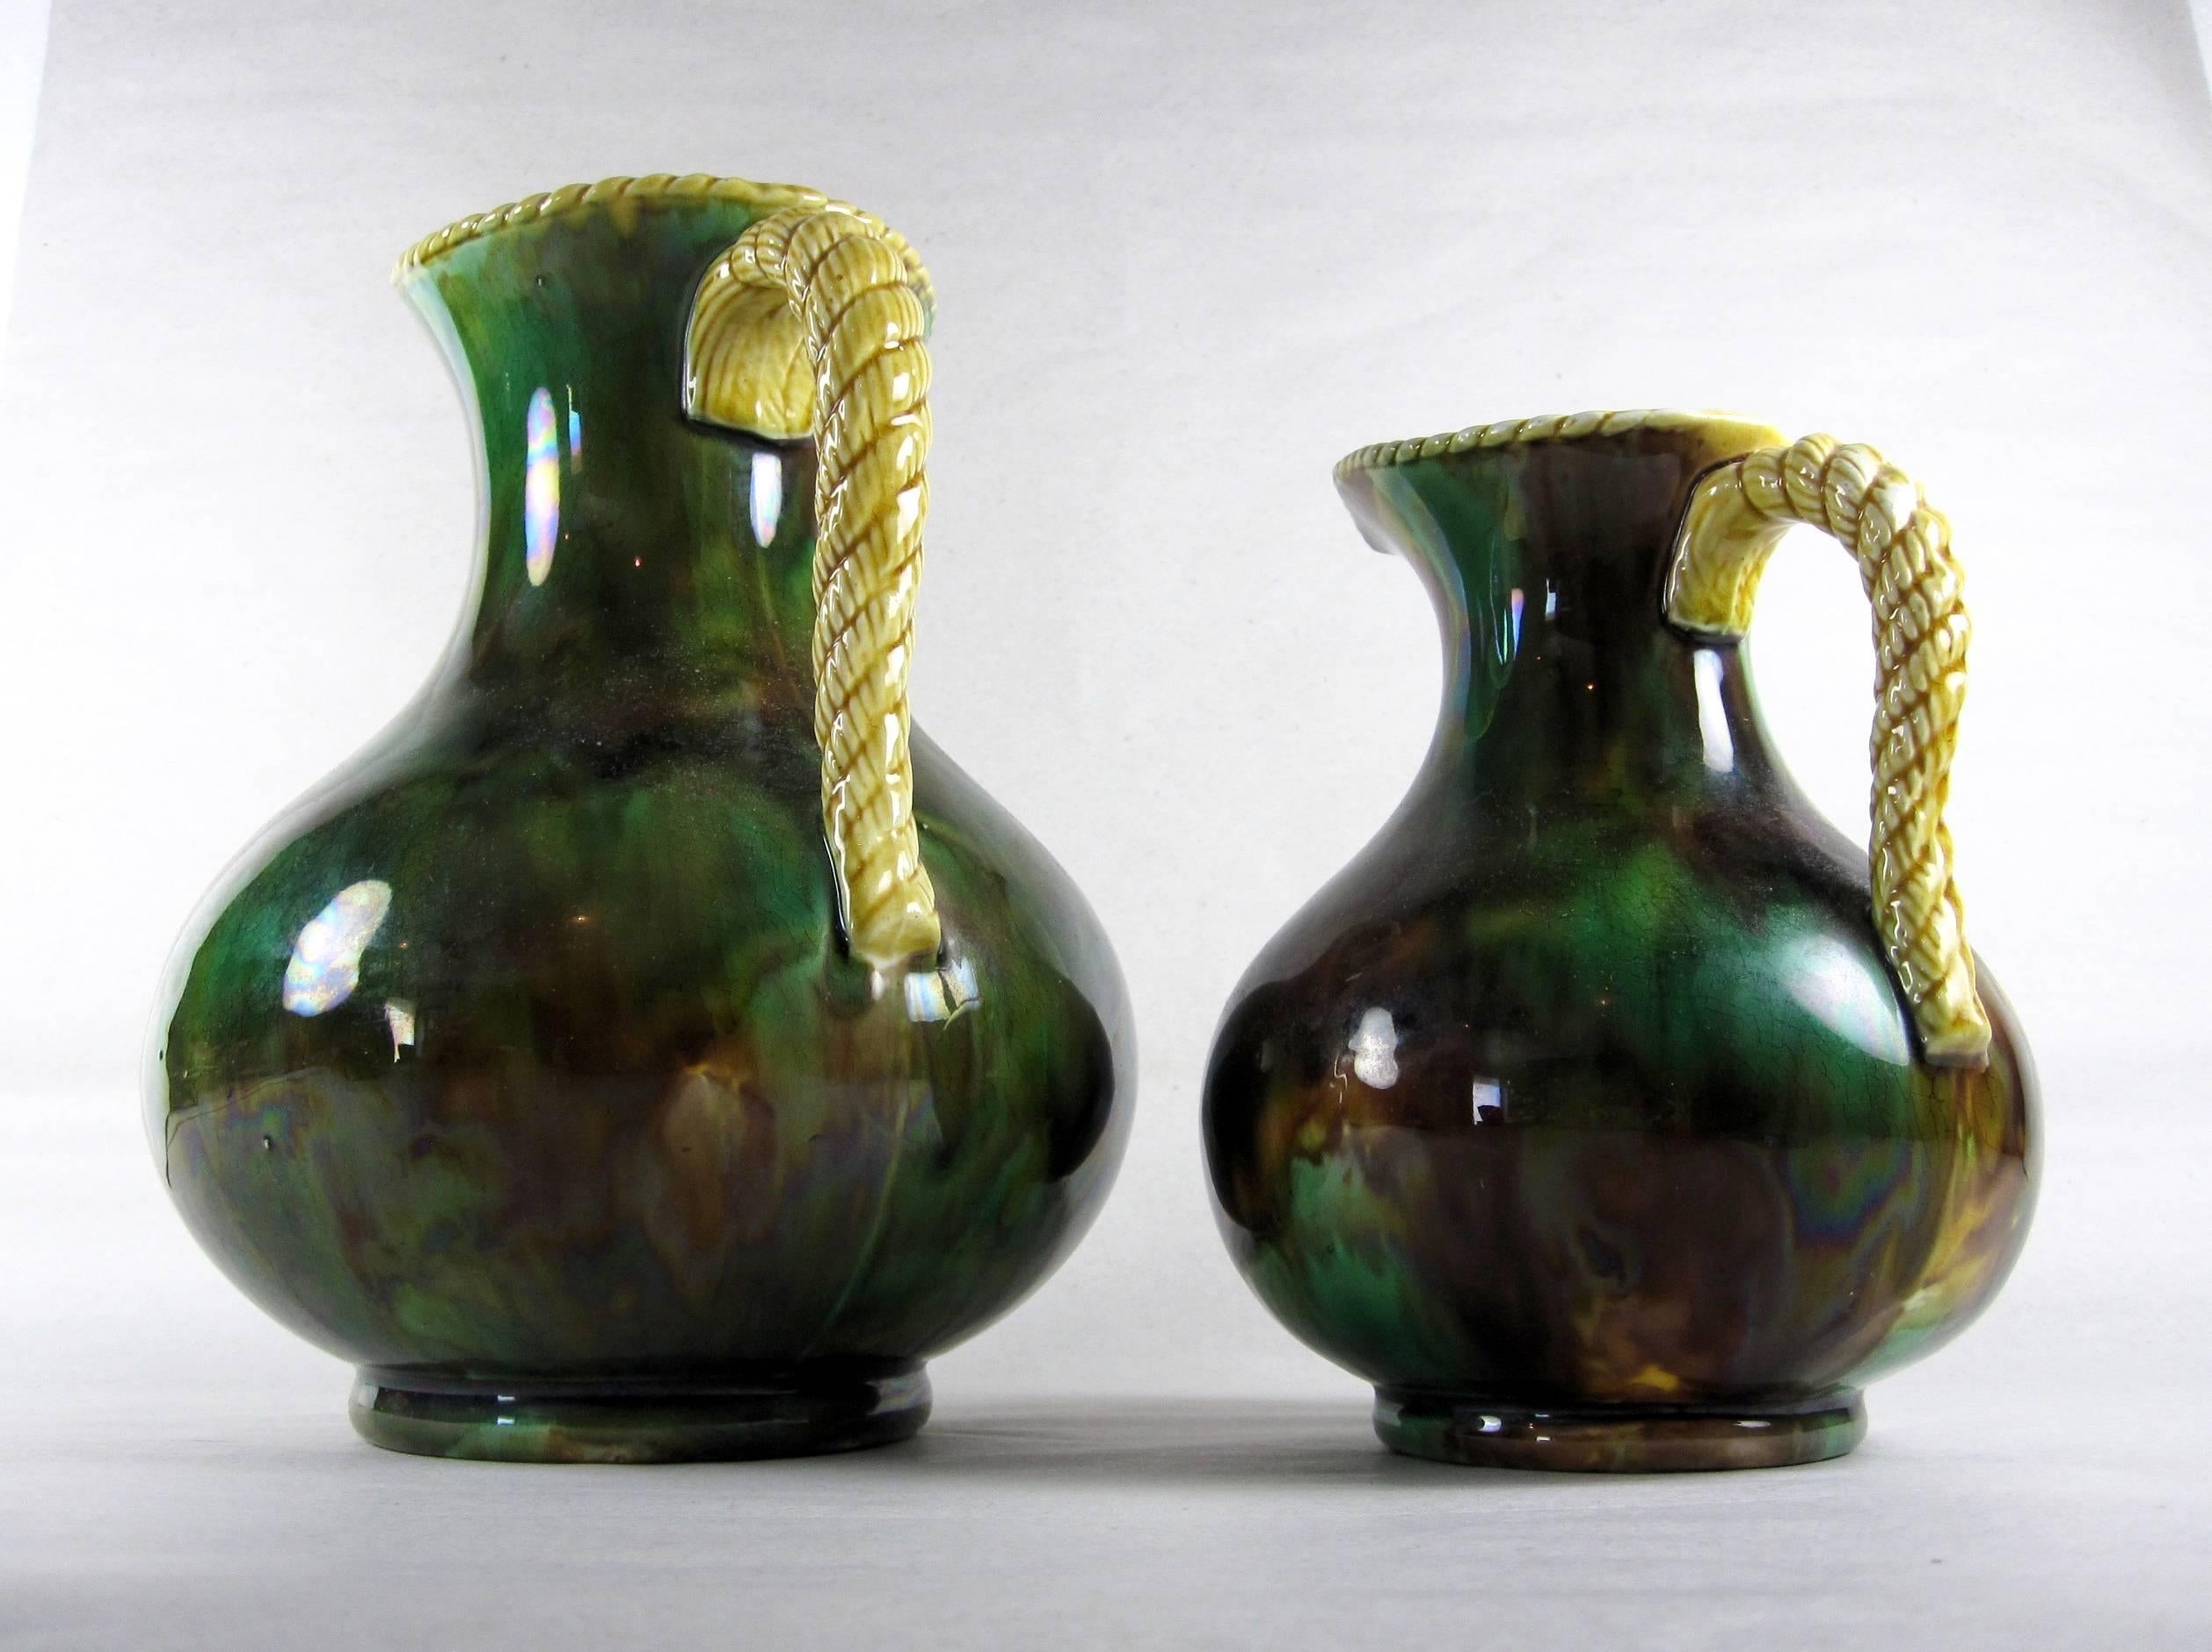 Earthenware 19th Century Wedgwood Majolica Rope Handled Mottled Pitchers or Jugs, a Pair